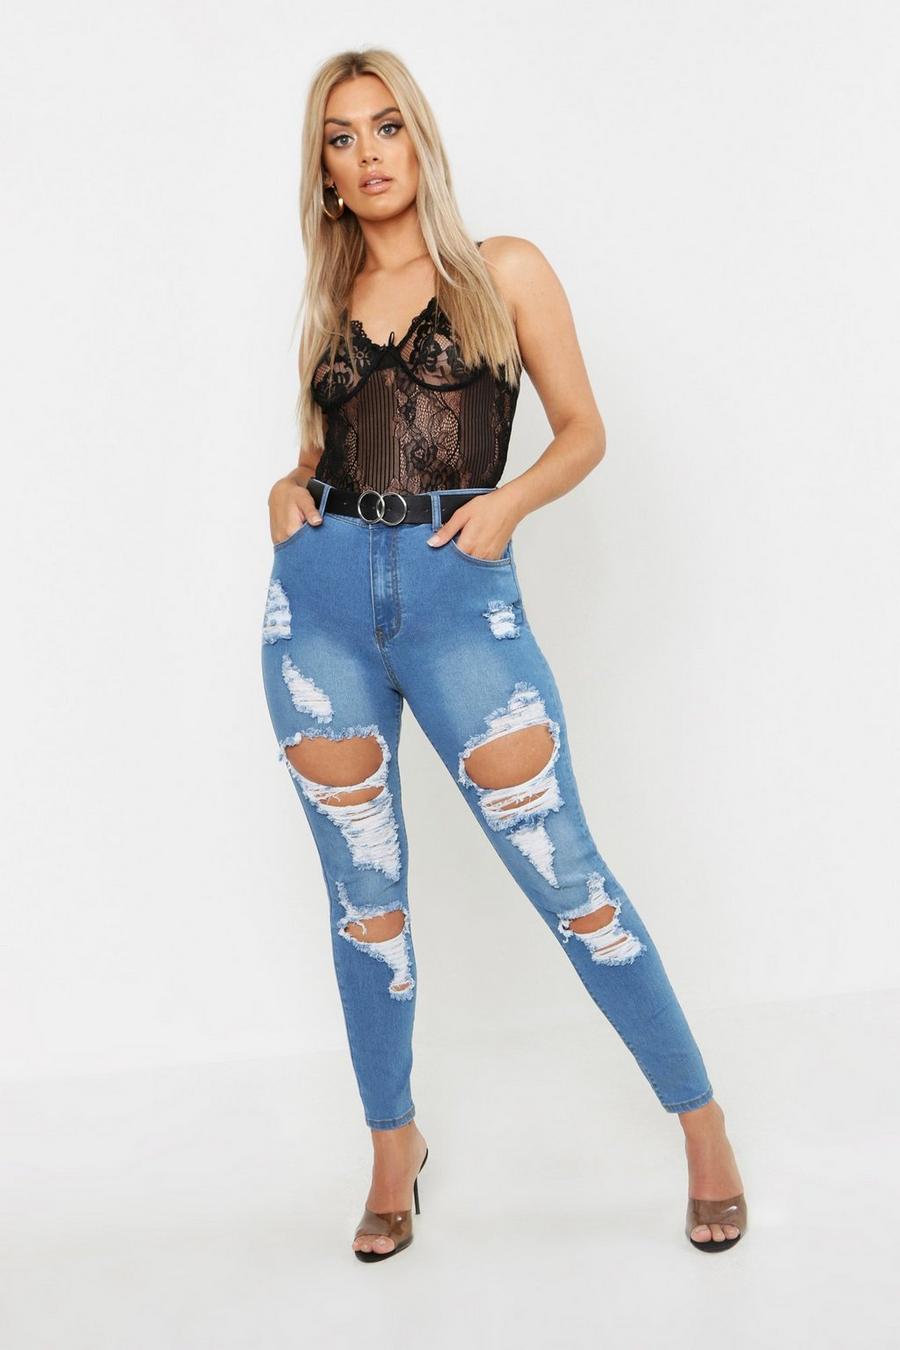 Ripped Jeans For Women Jeans Stretch High Women's Distressed